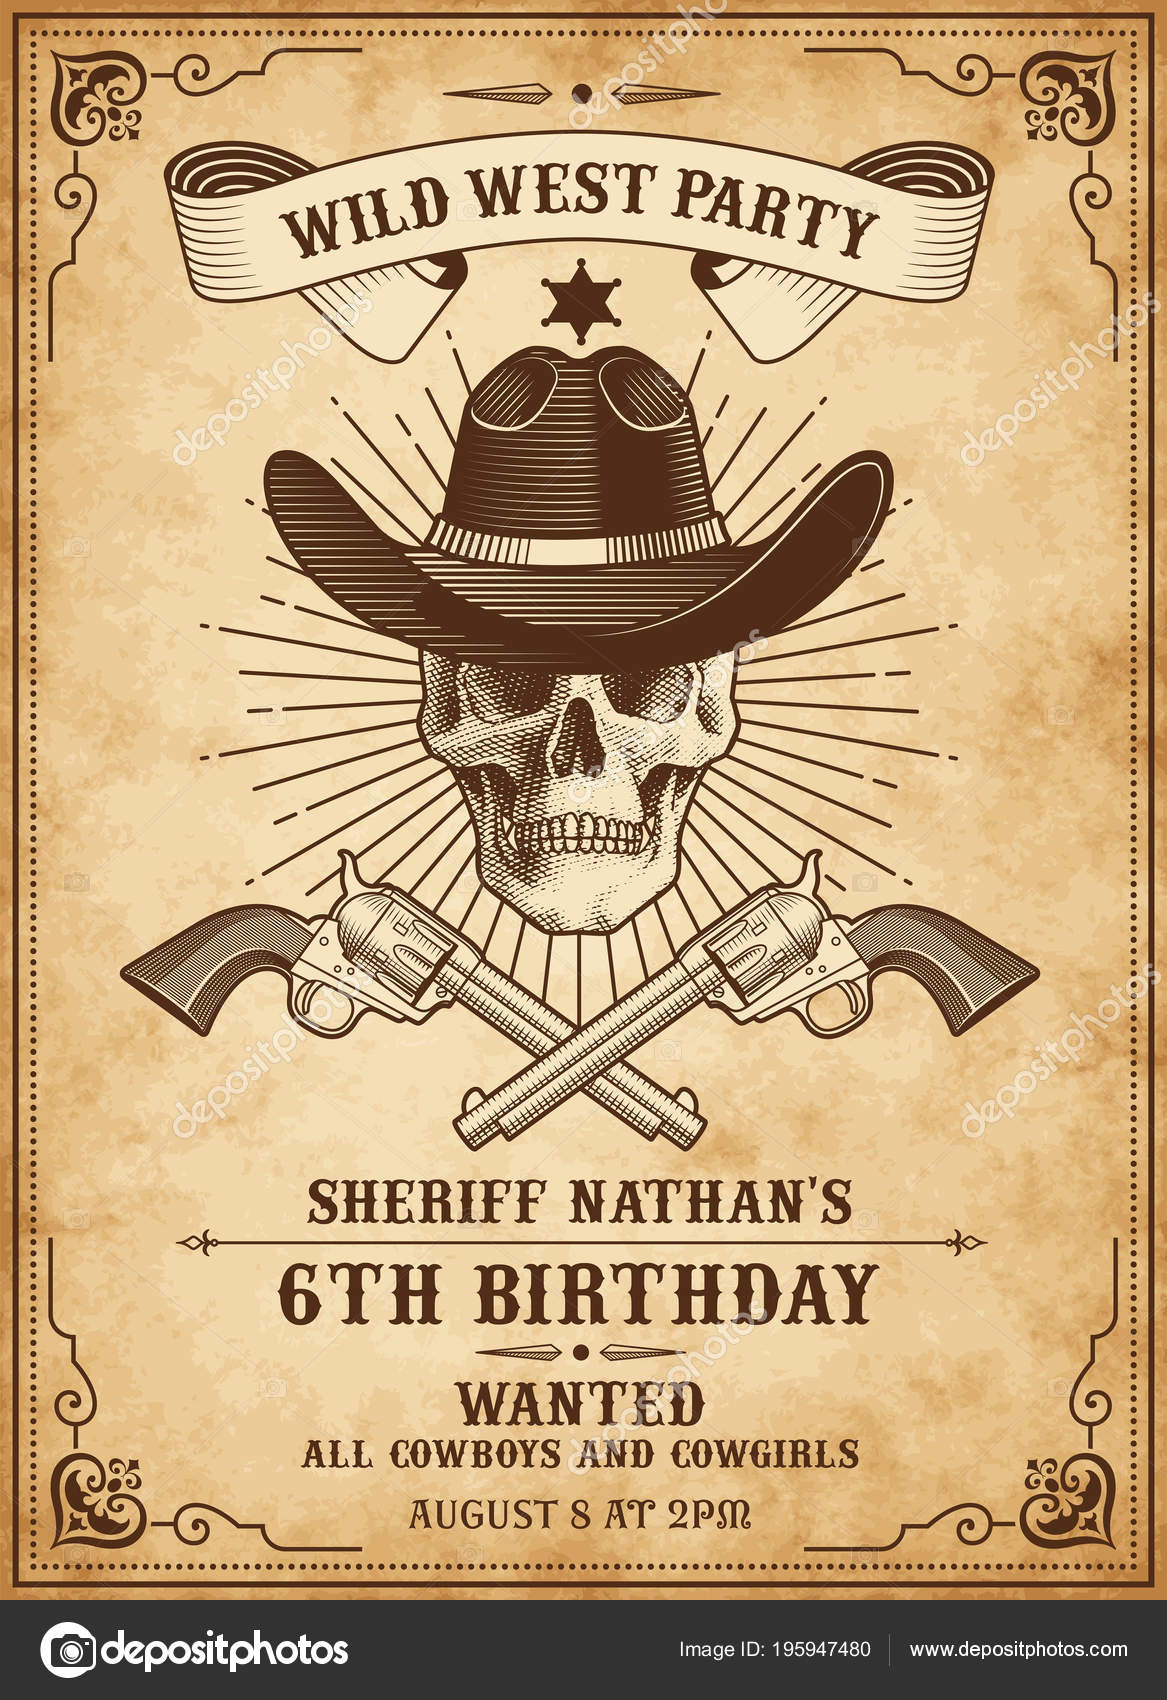 vintage looking invite template for a party or event with wild west